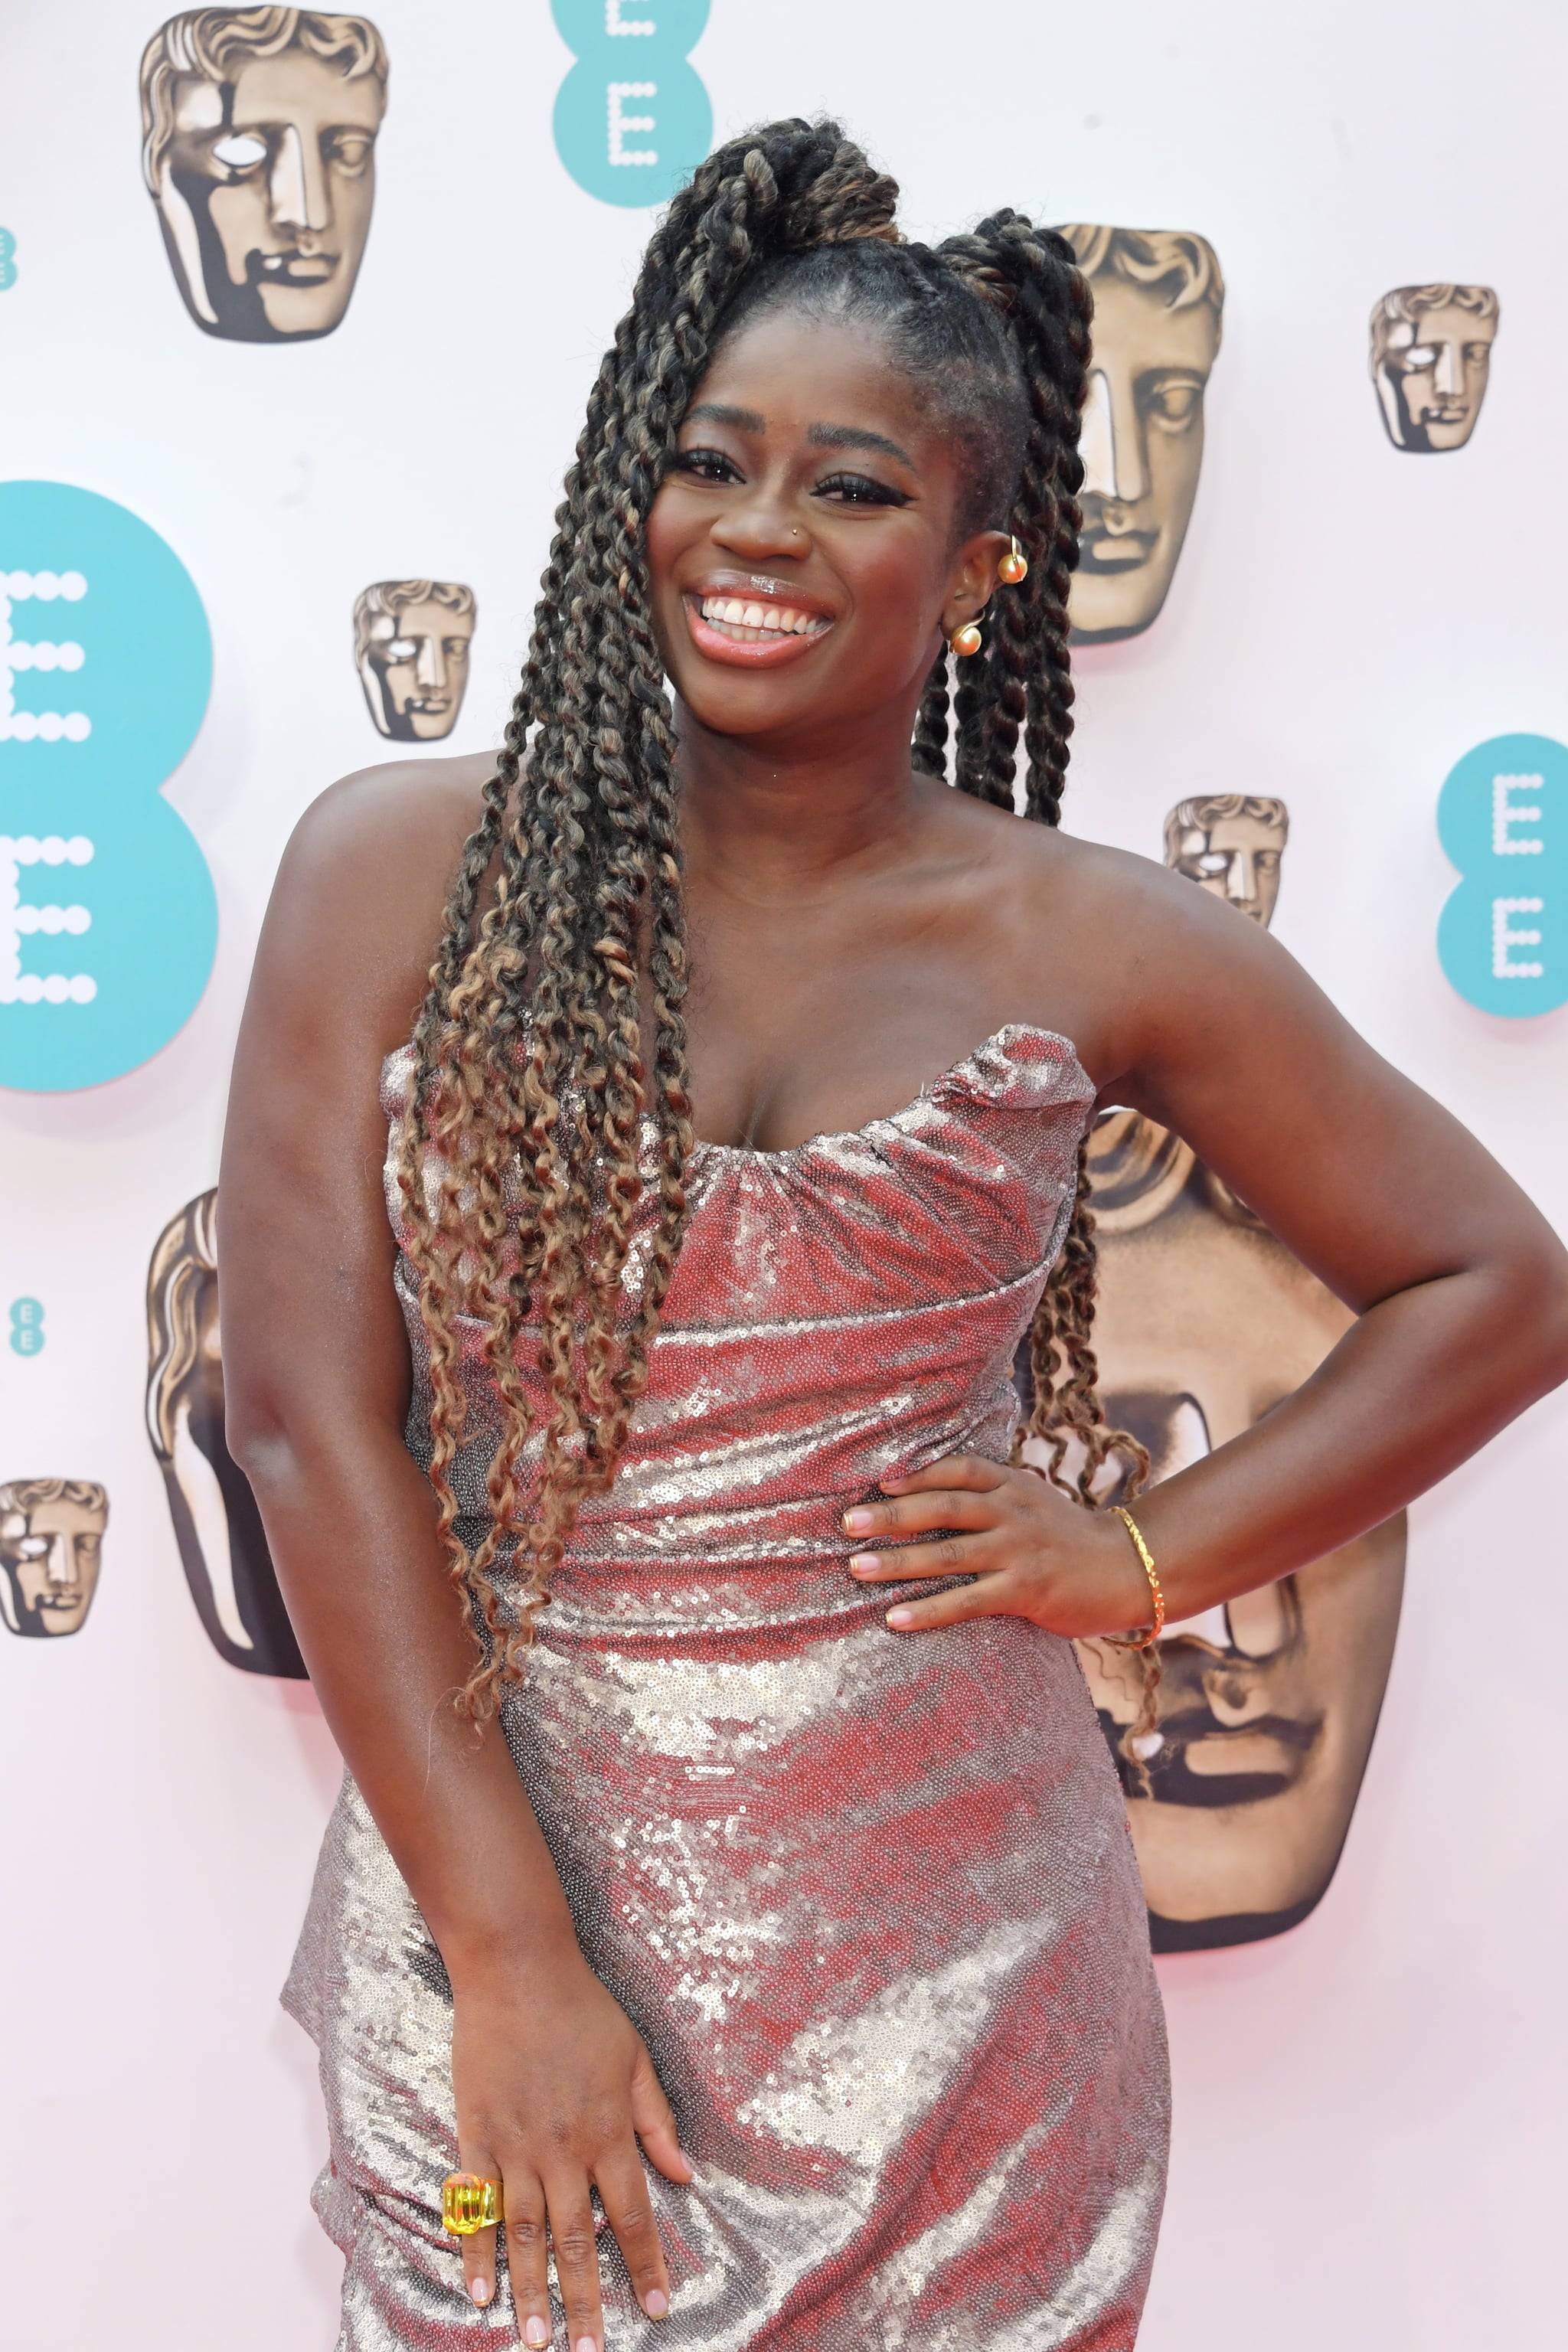 A Look at the Beauty and Glam from the 2022 BAFTA Awards